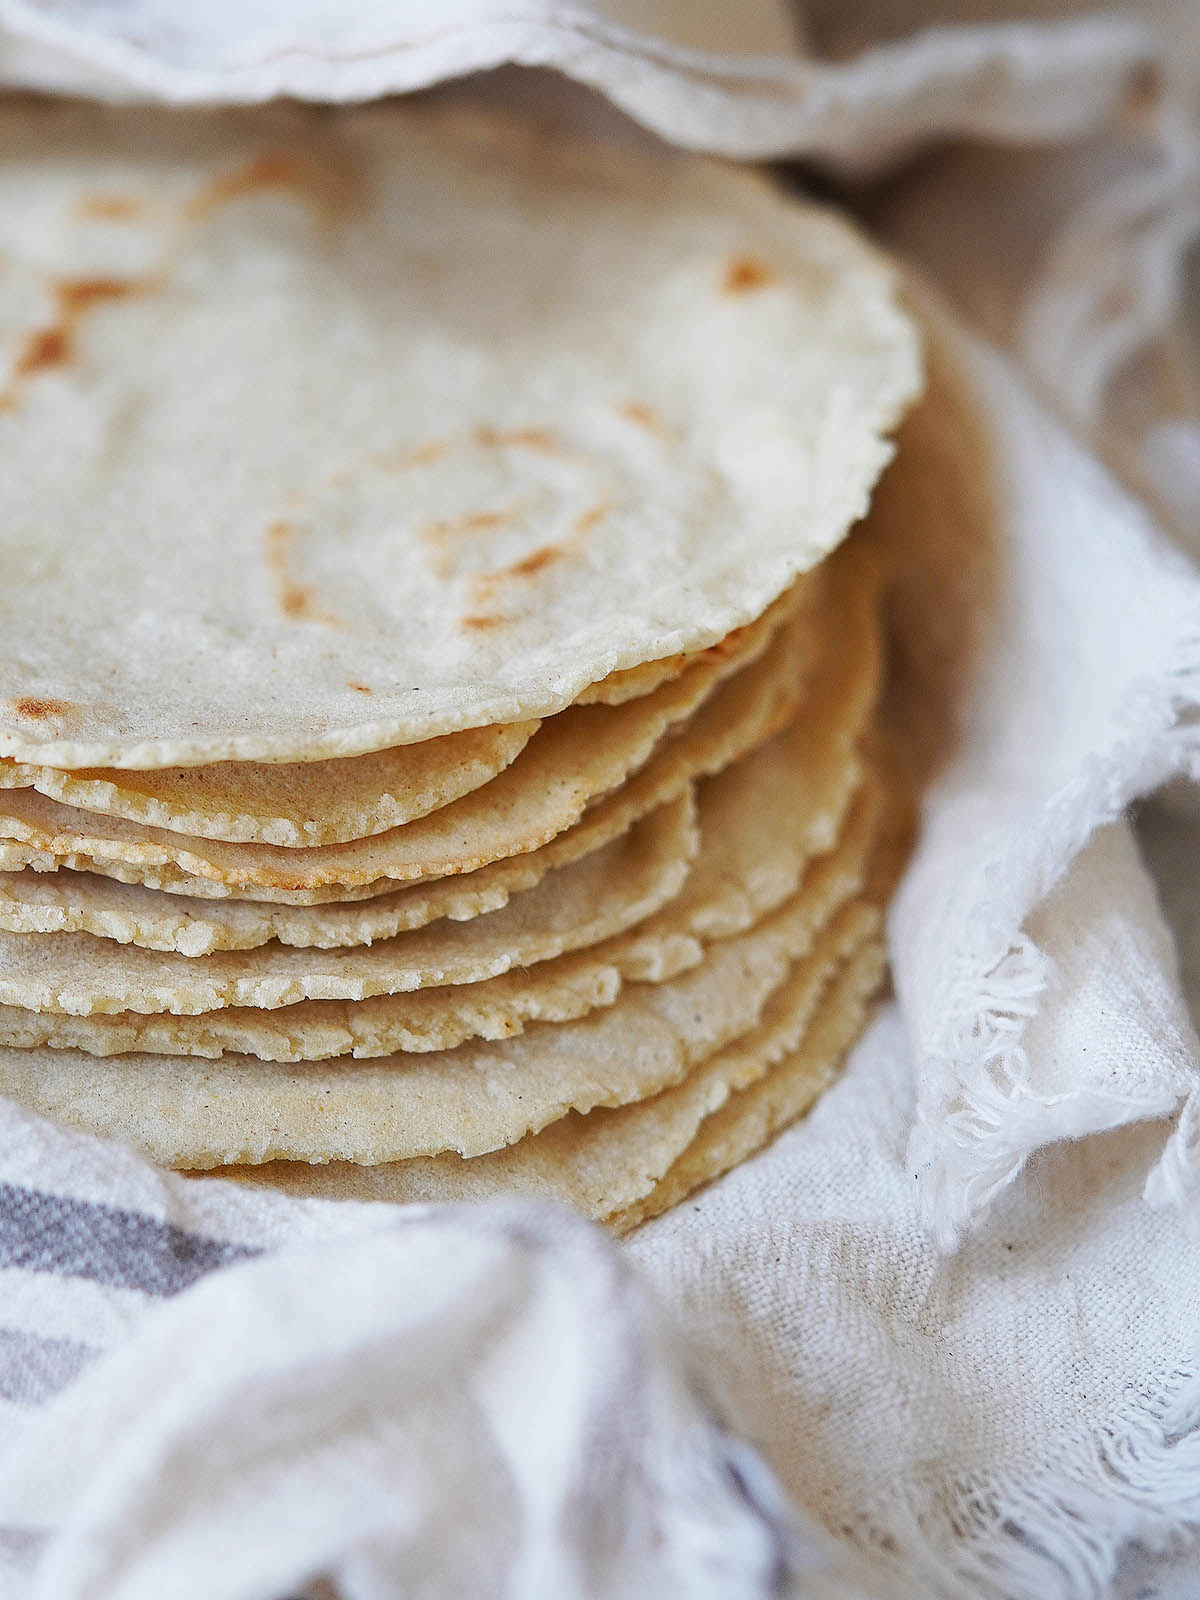 A stack of tortillas inside a kitchen towel.